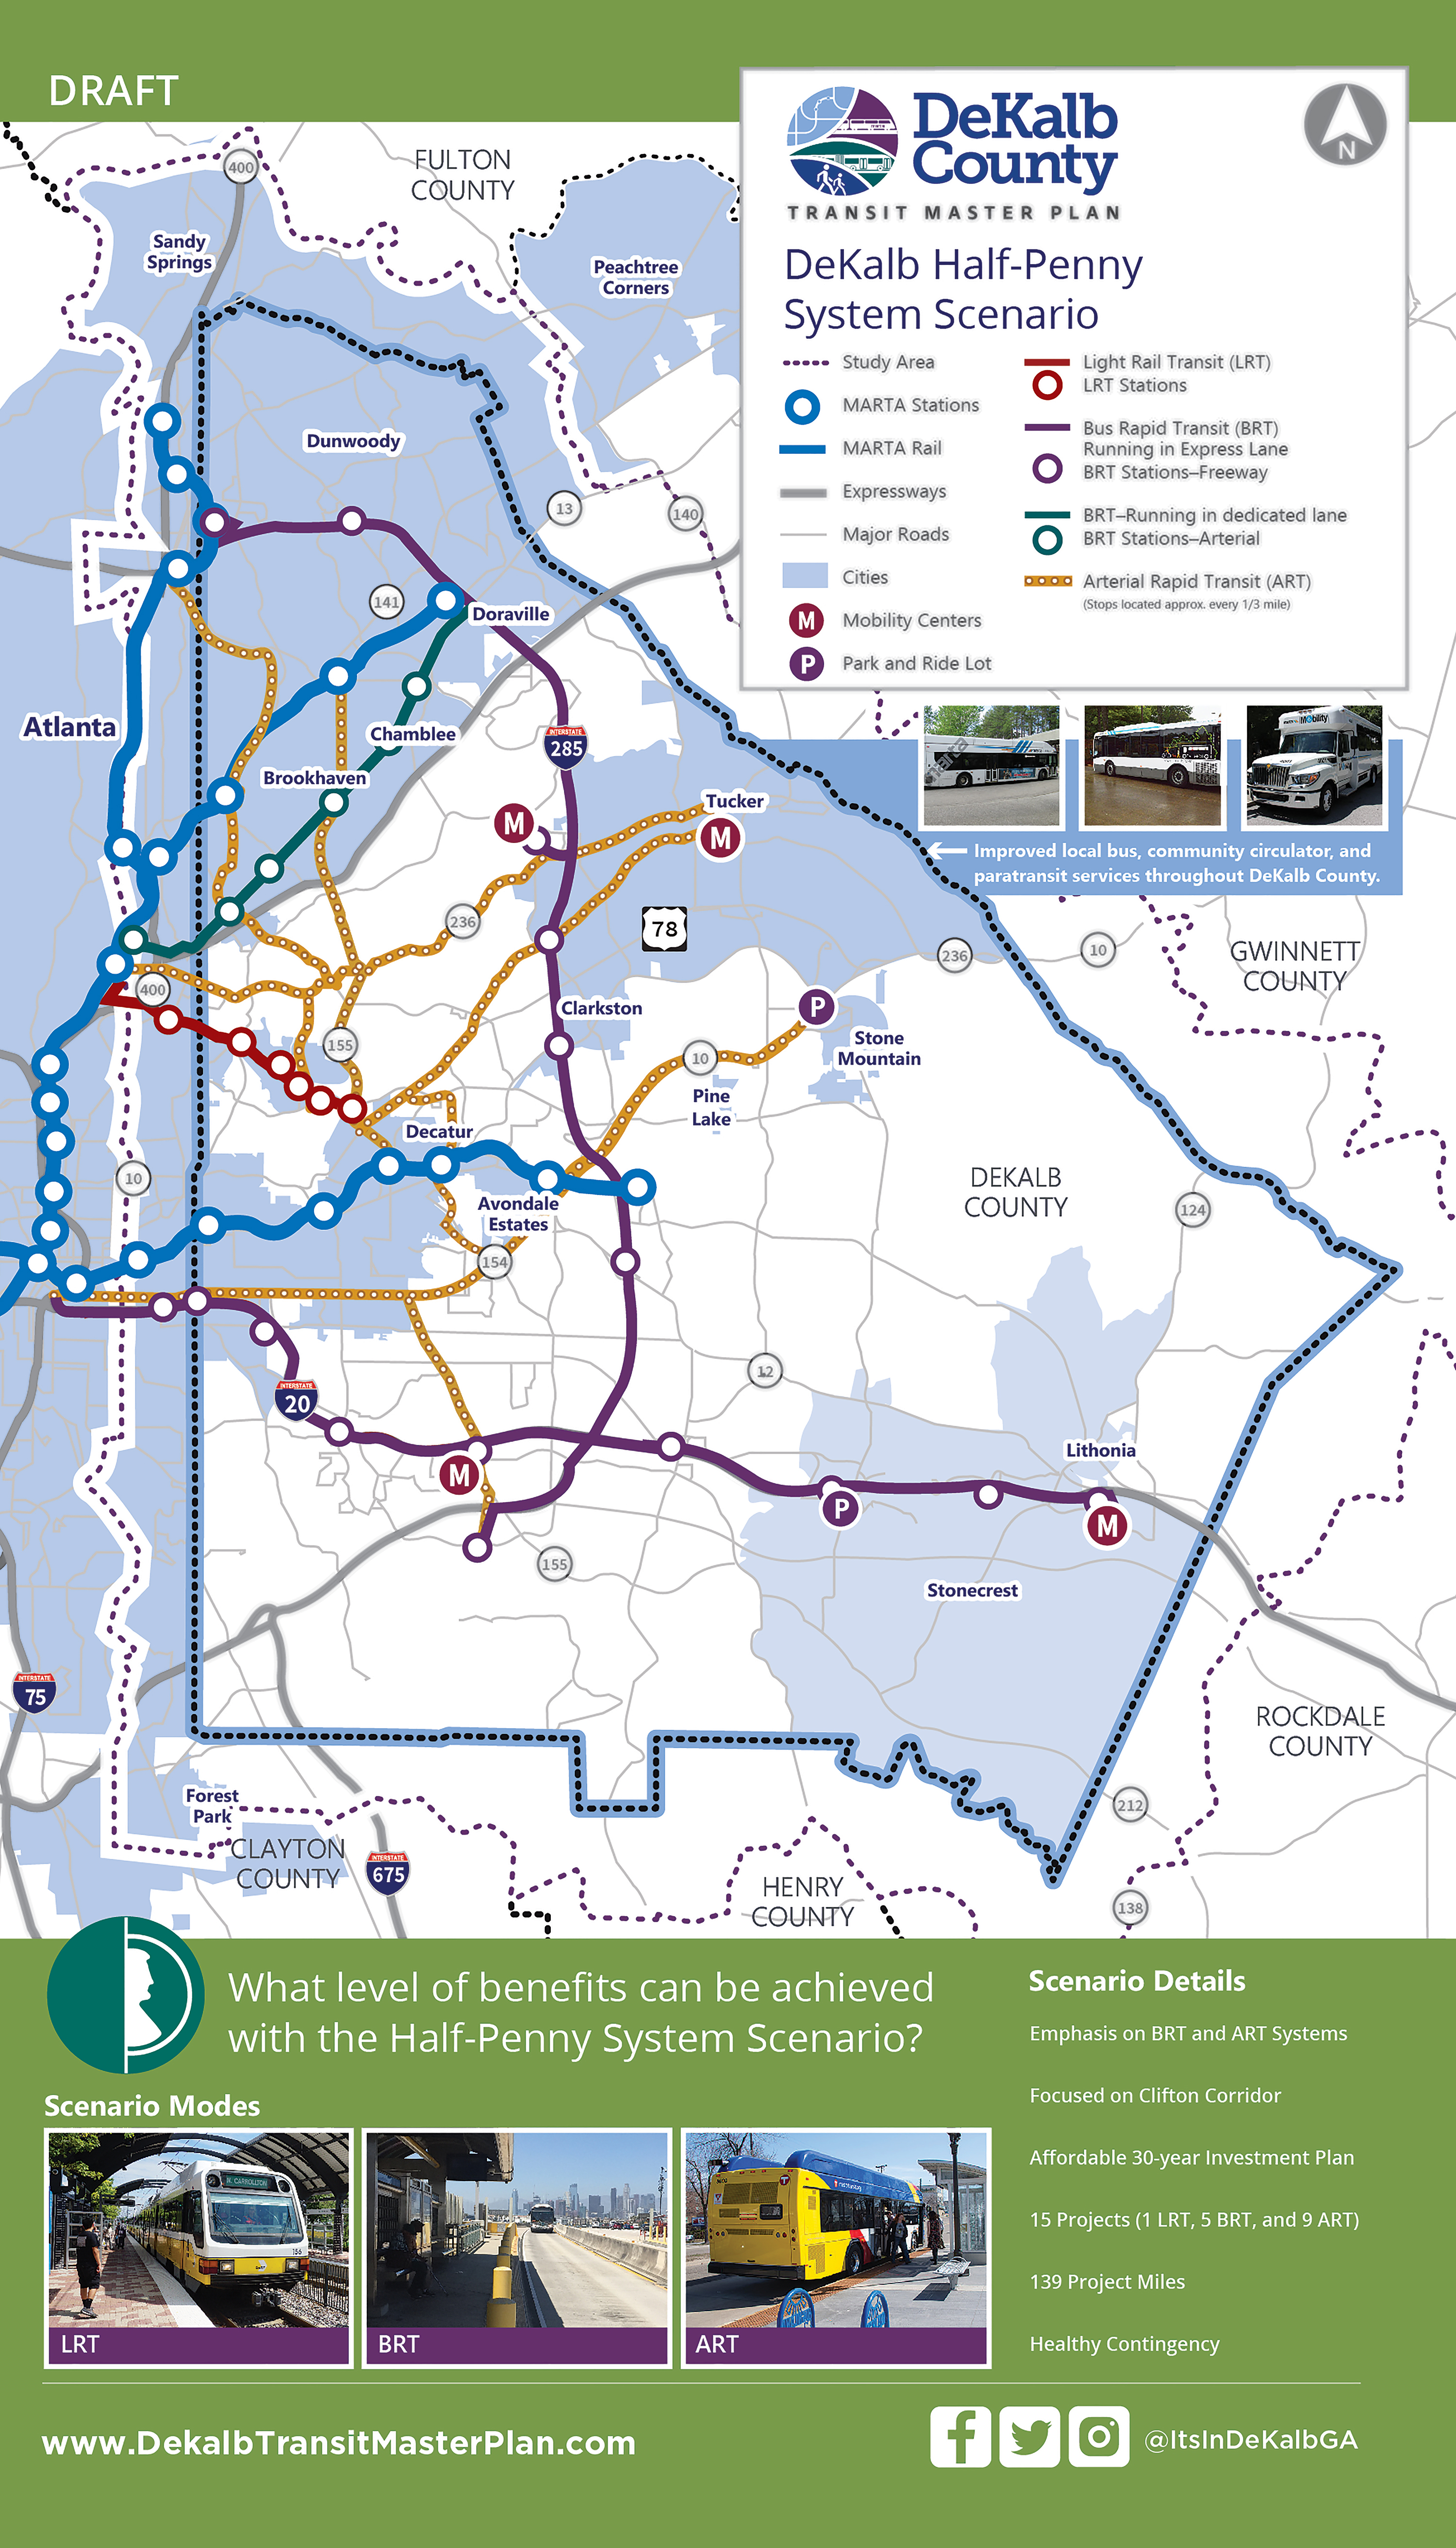 DeKalb County Half-Penny System Scenario features 15 projects-1 LRT, 5, BRT, and 9 ART. A total of 139 miles, which are affordable under a half-penny sales tax.